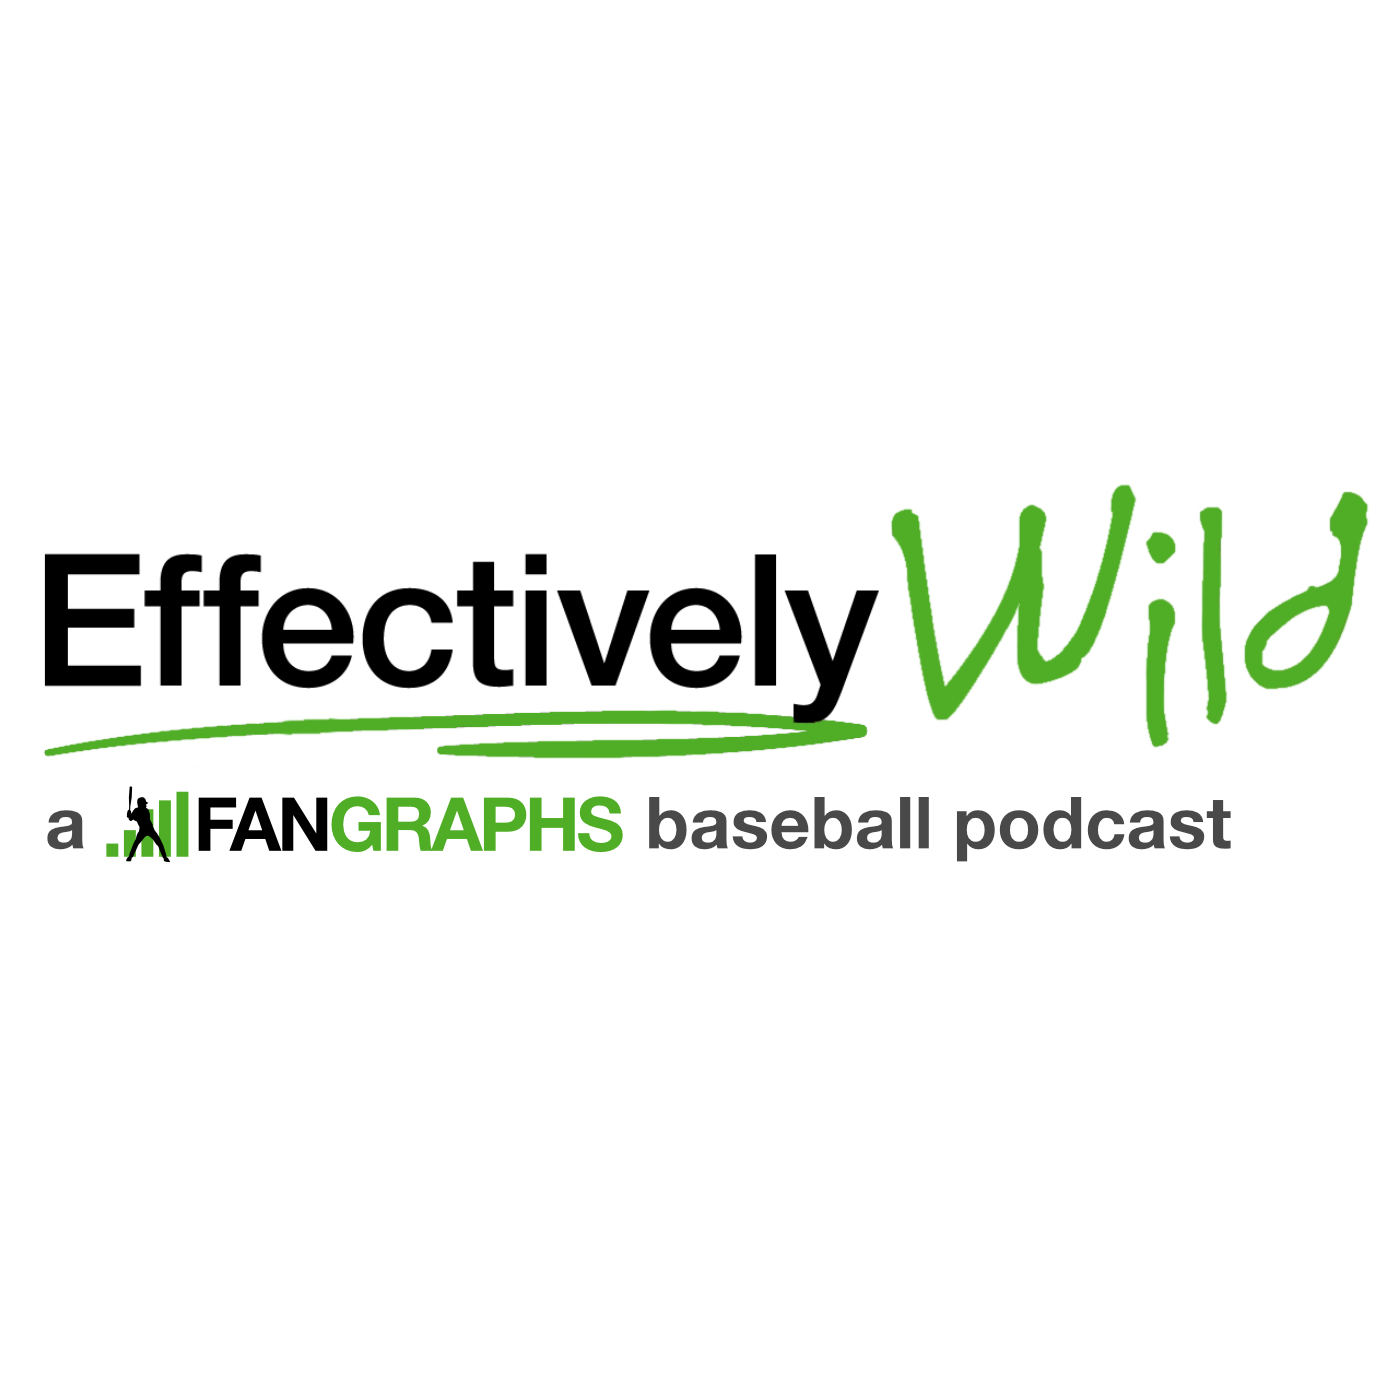 A highlight from Effectively Wild Episode 1886: Vins Vignettes